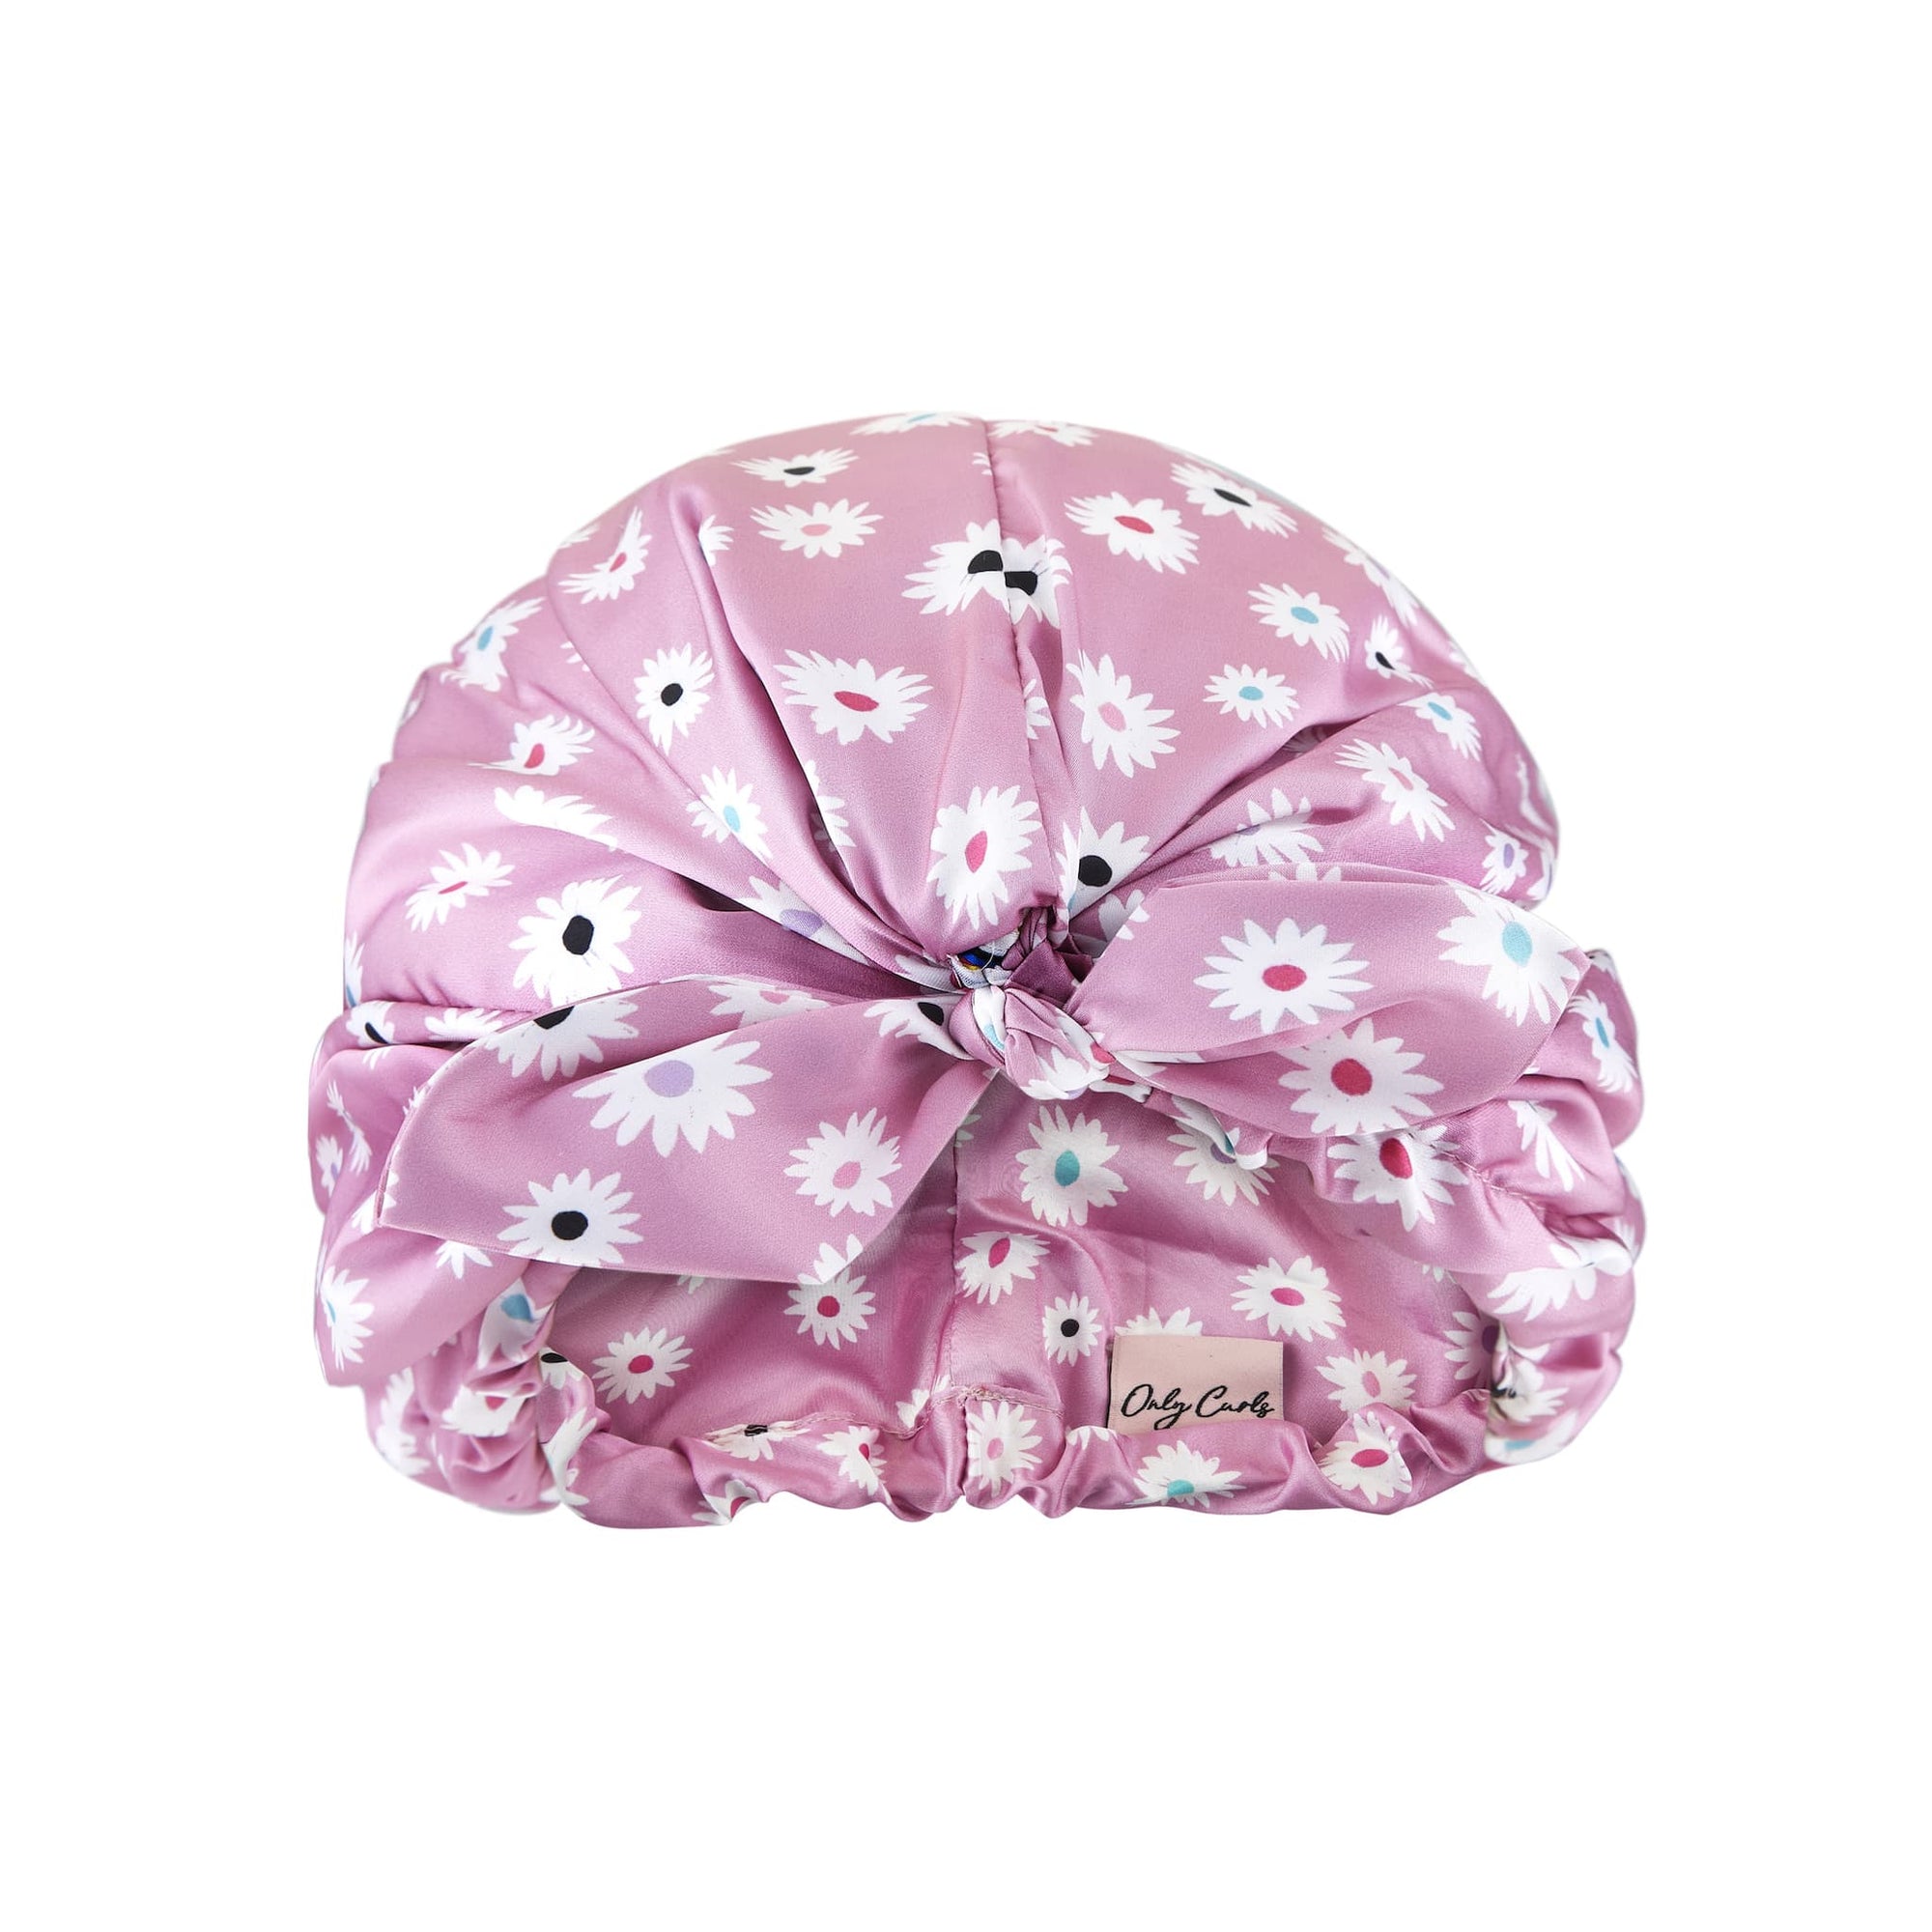 Only Curls Satin Sleep Turban - Dusty Pink Daisy - Only Curls